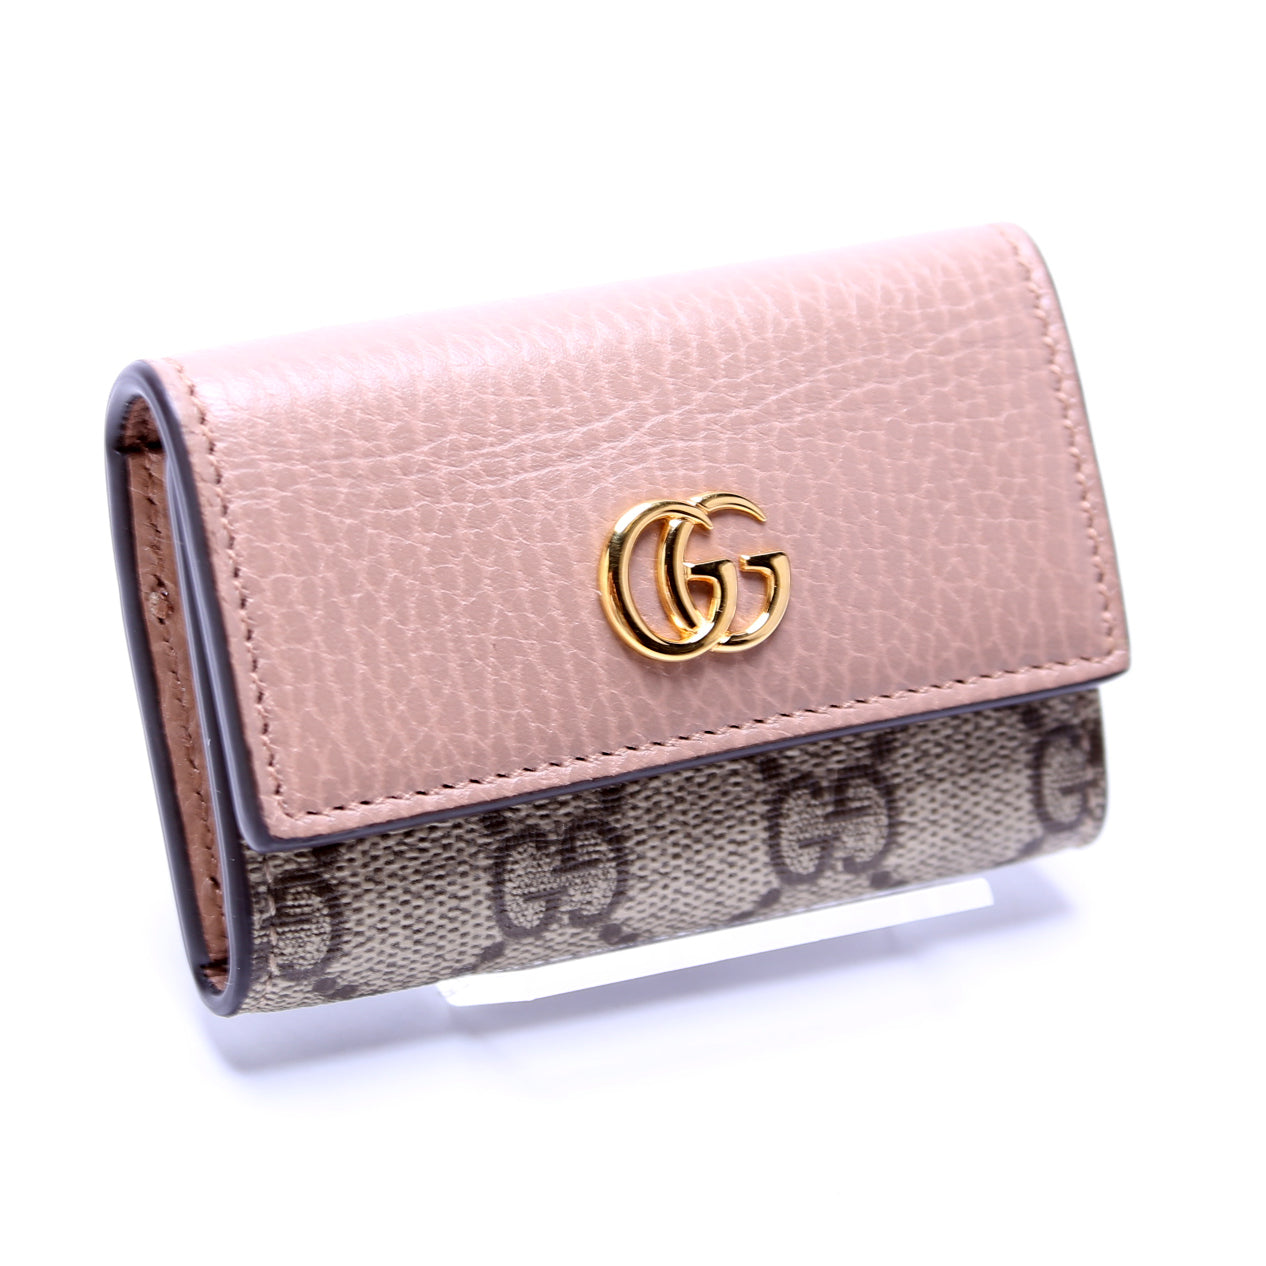 GG Marmont leather key case in dusty pink leather and GG supreme